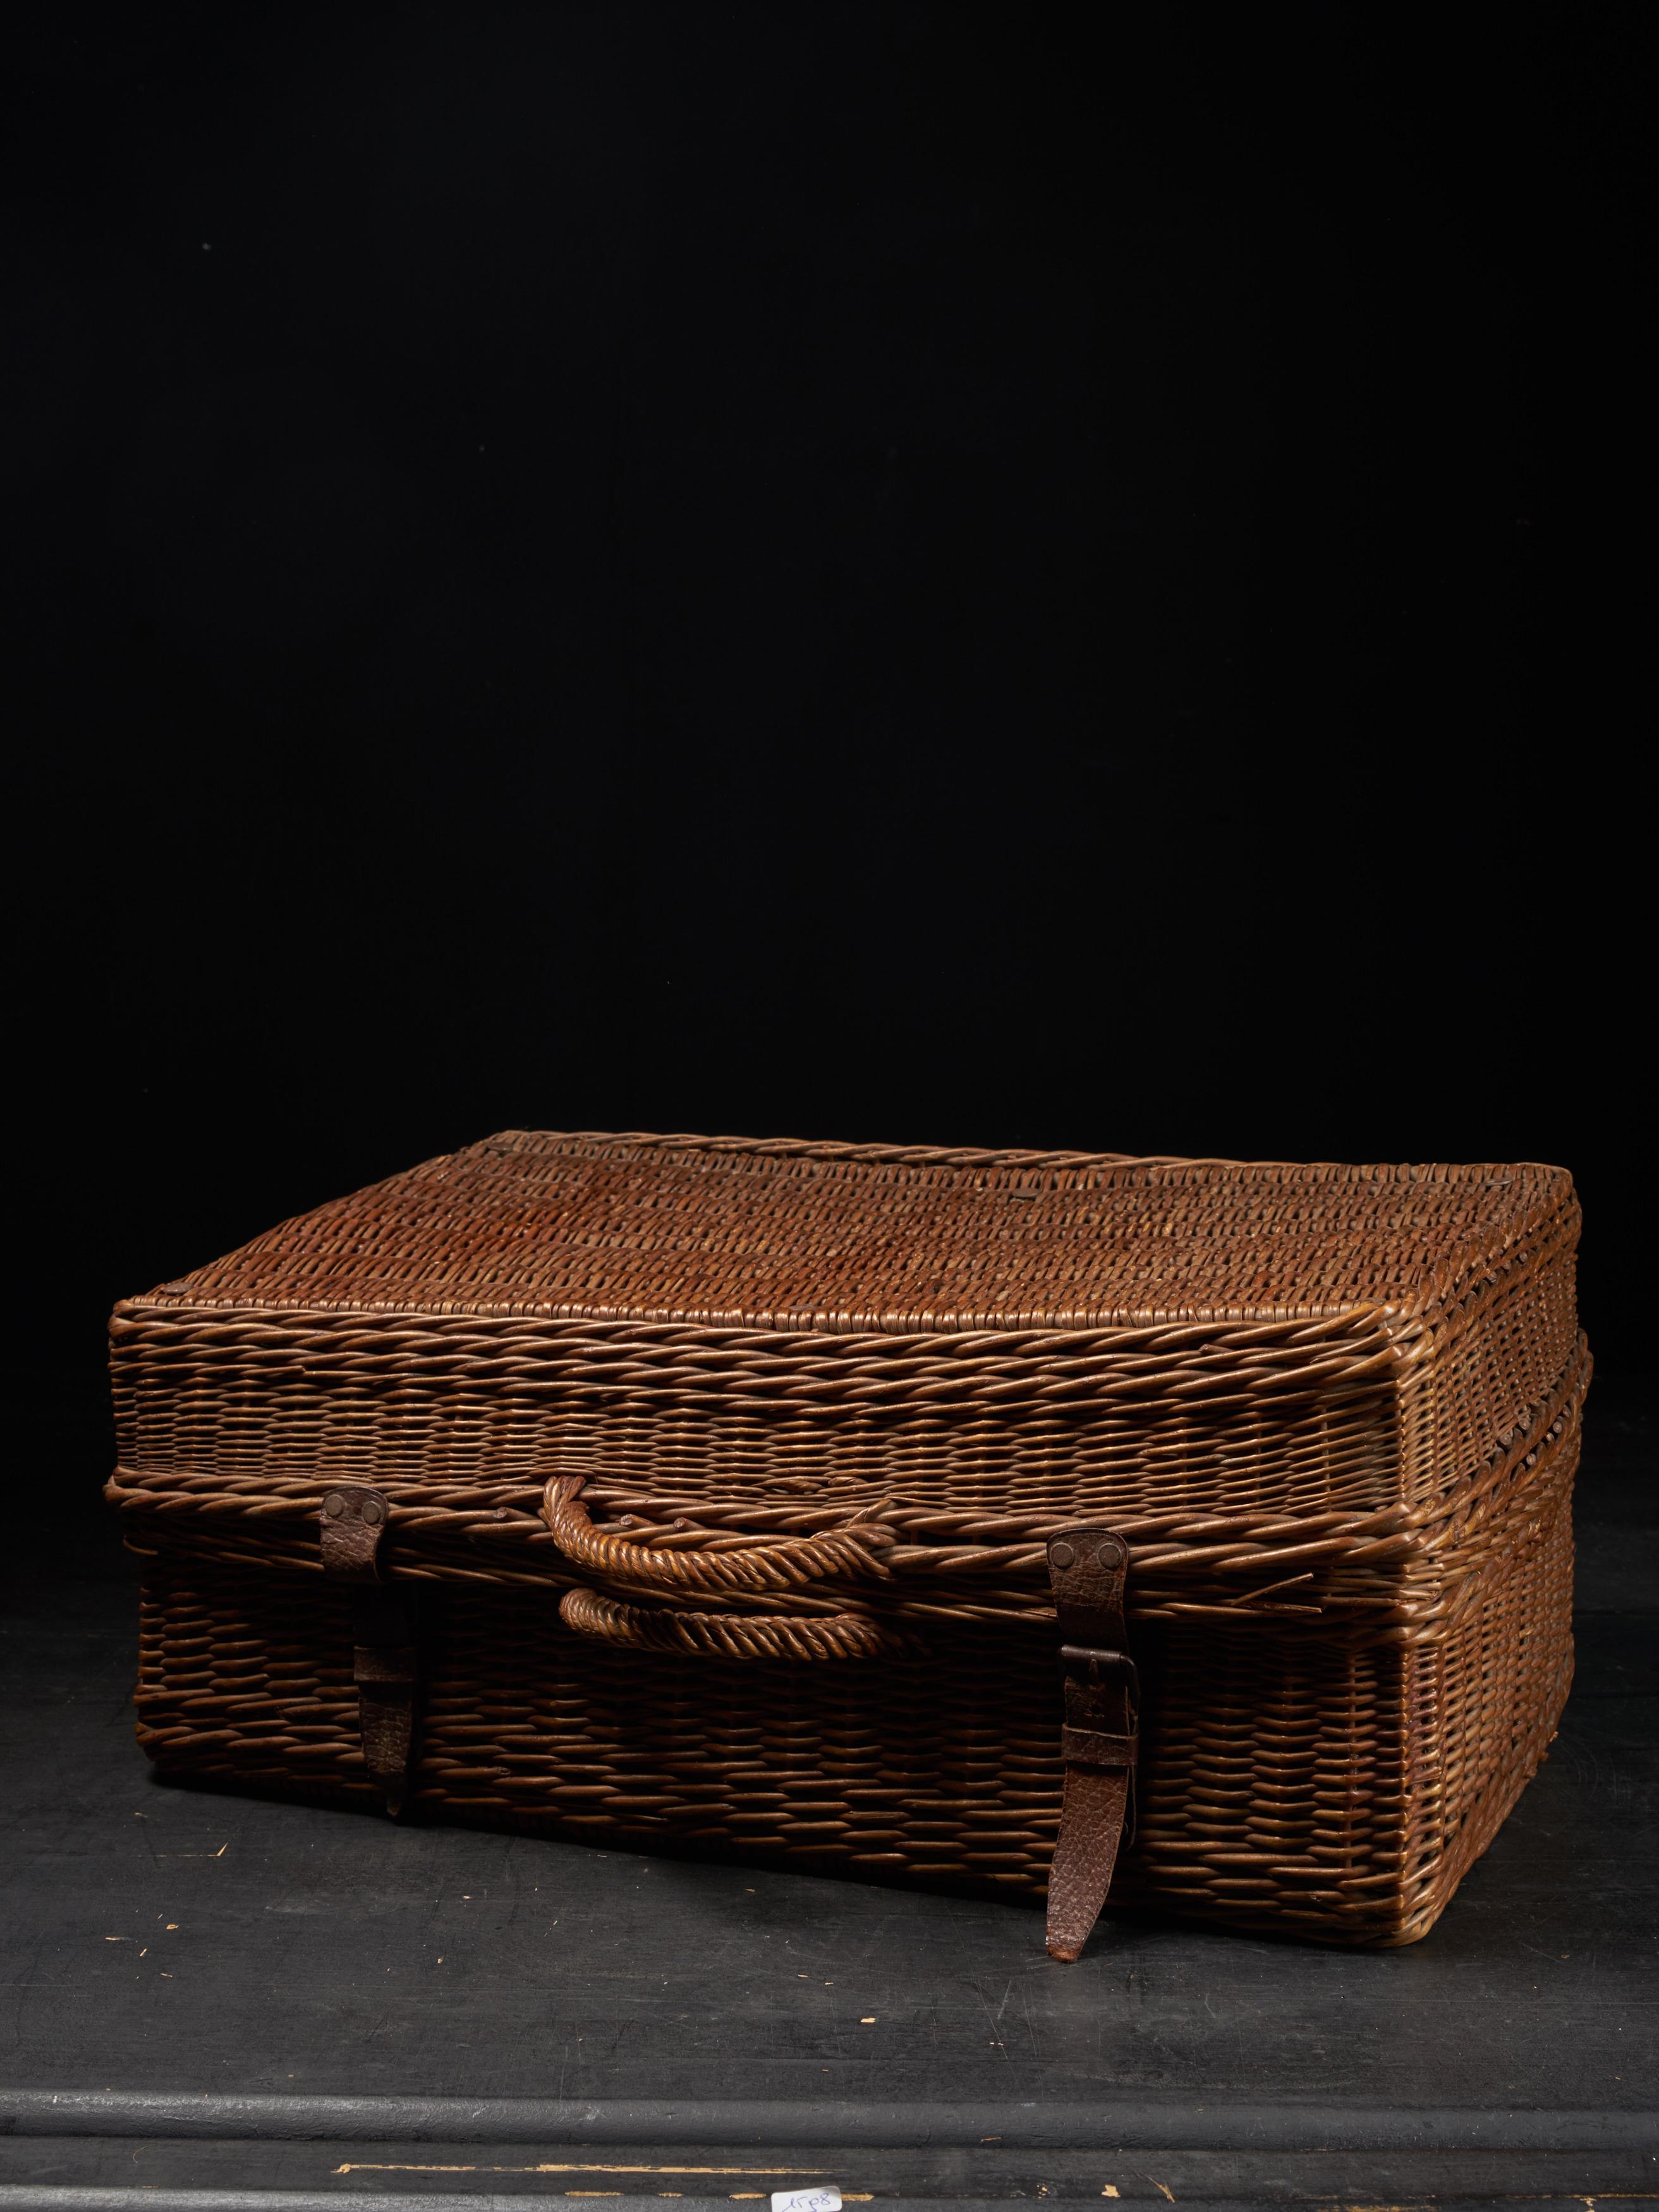 This French picnic basket for four was made to last with quality construction and stylish
details. Beautifully handcrafted using full reed willow and genuine leather
straps, the basket includes ceramic plates, ceramic drinking cups, and